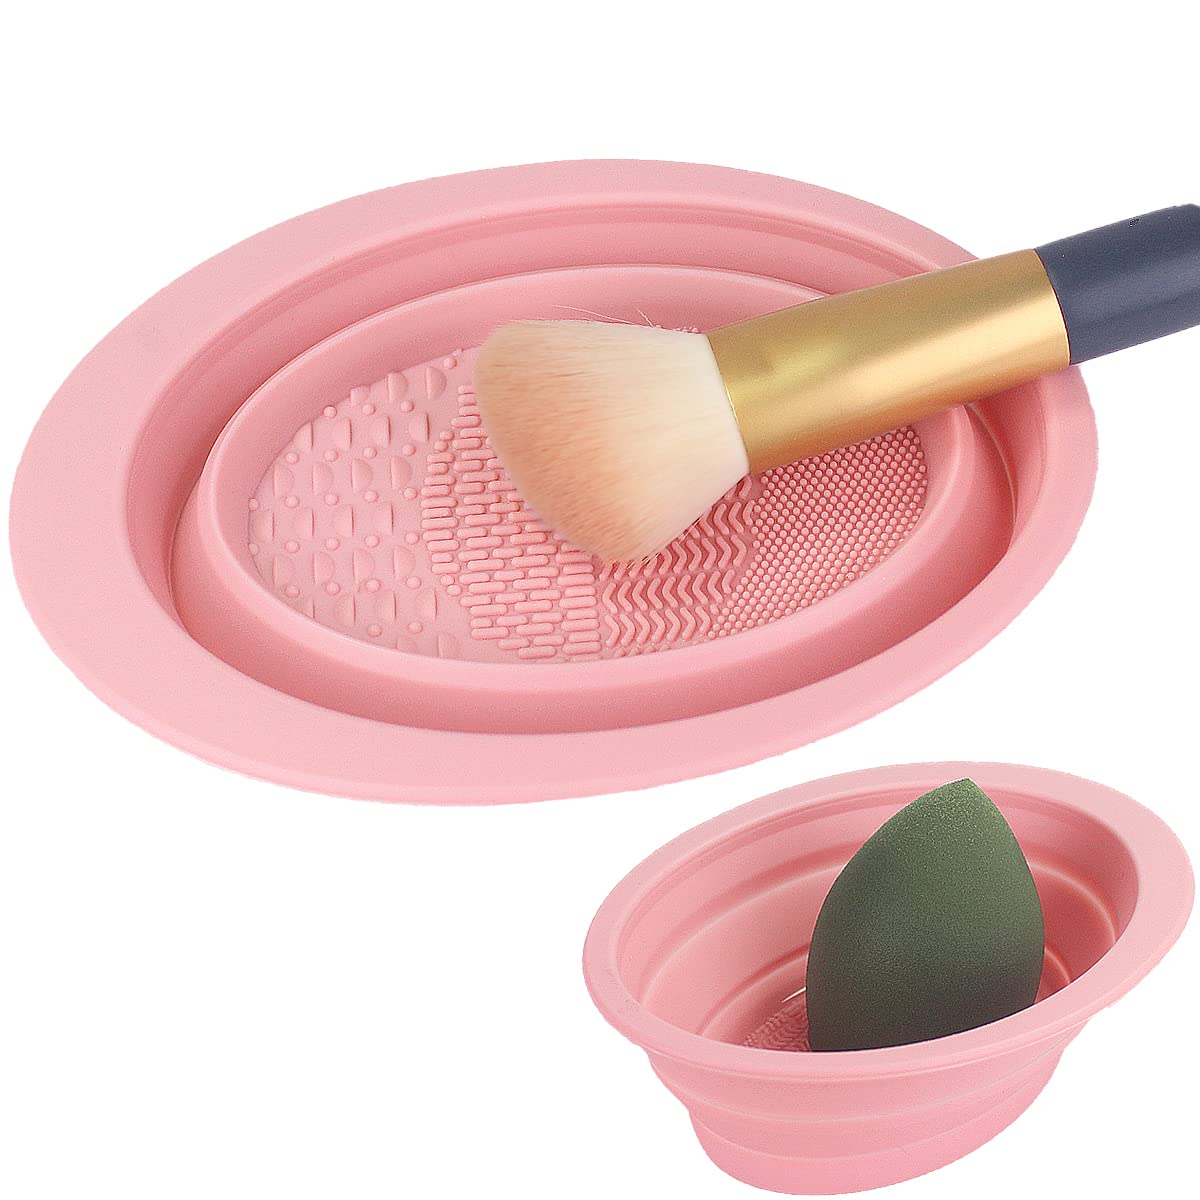 Silicone Makeup Brush Cleaner Cleaning Kit Washing Tool Cosmetic